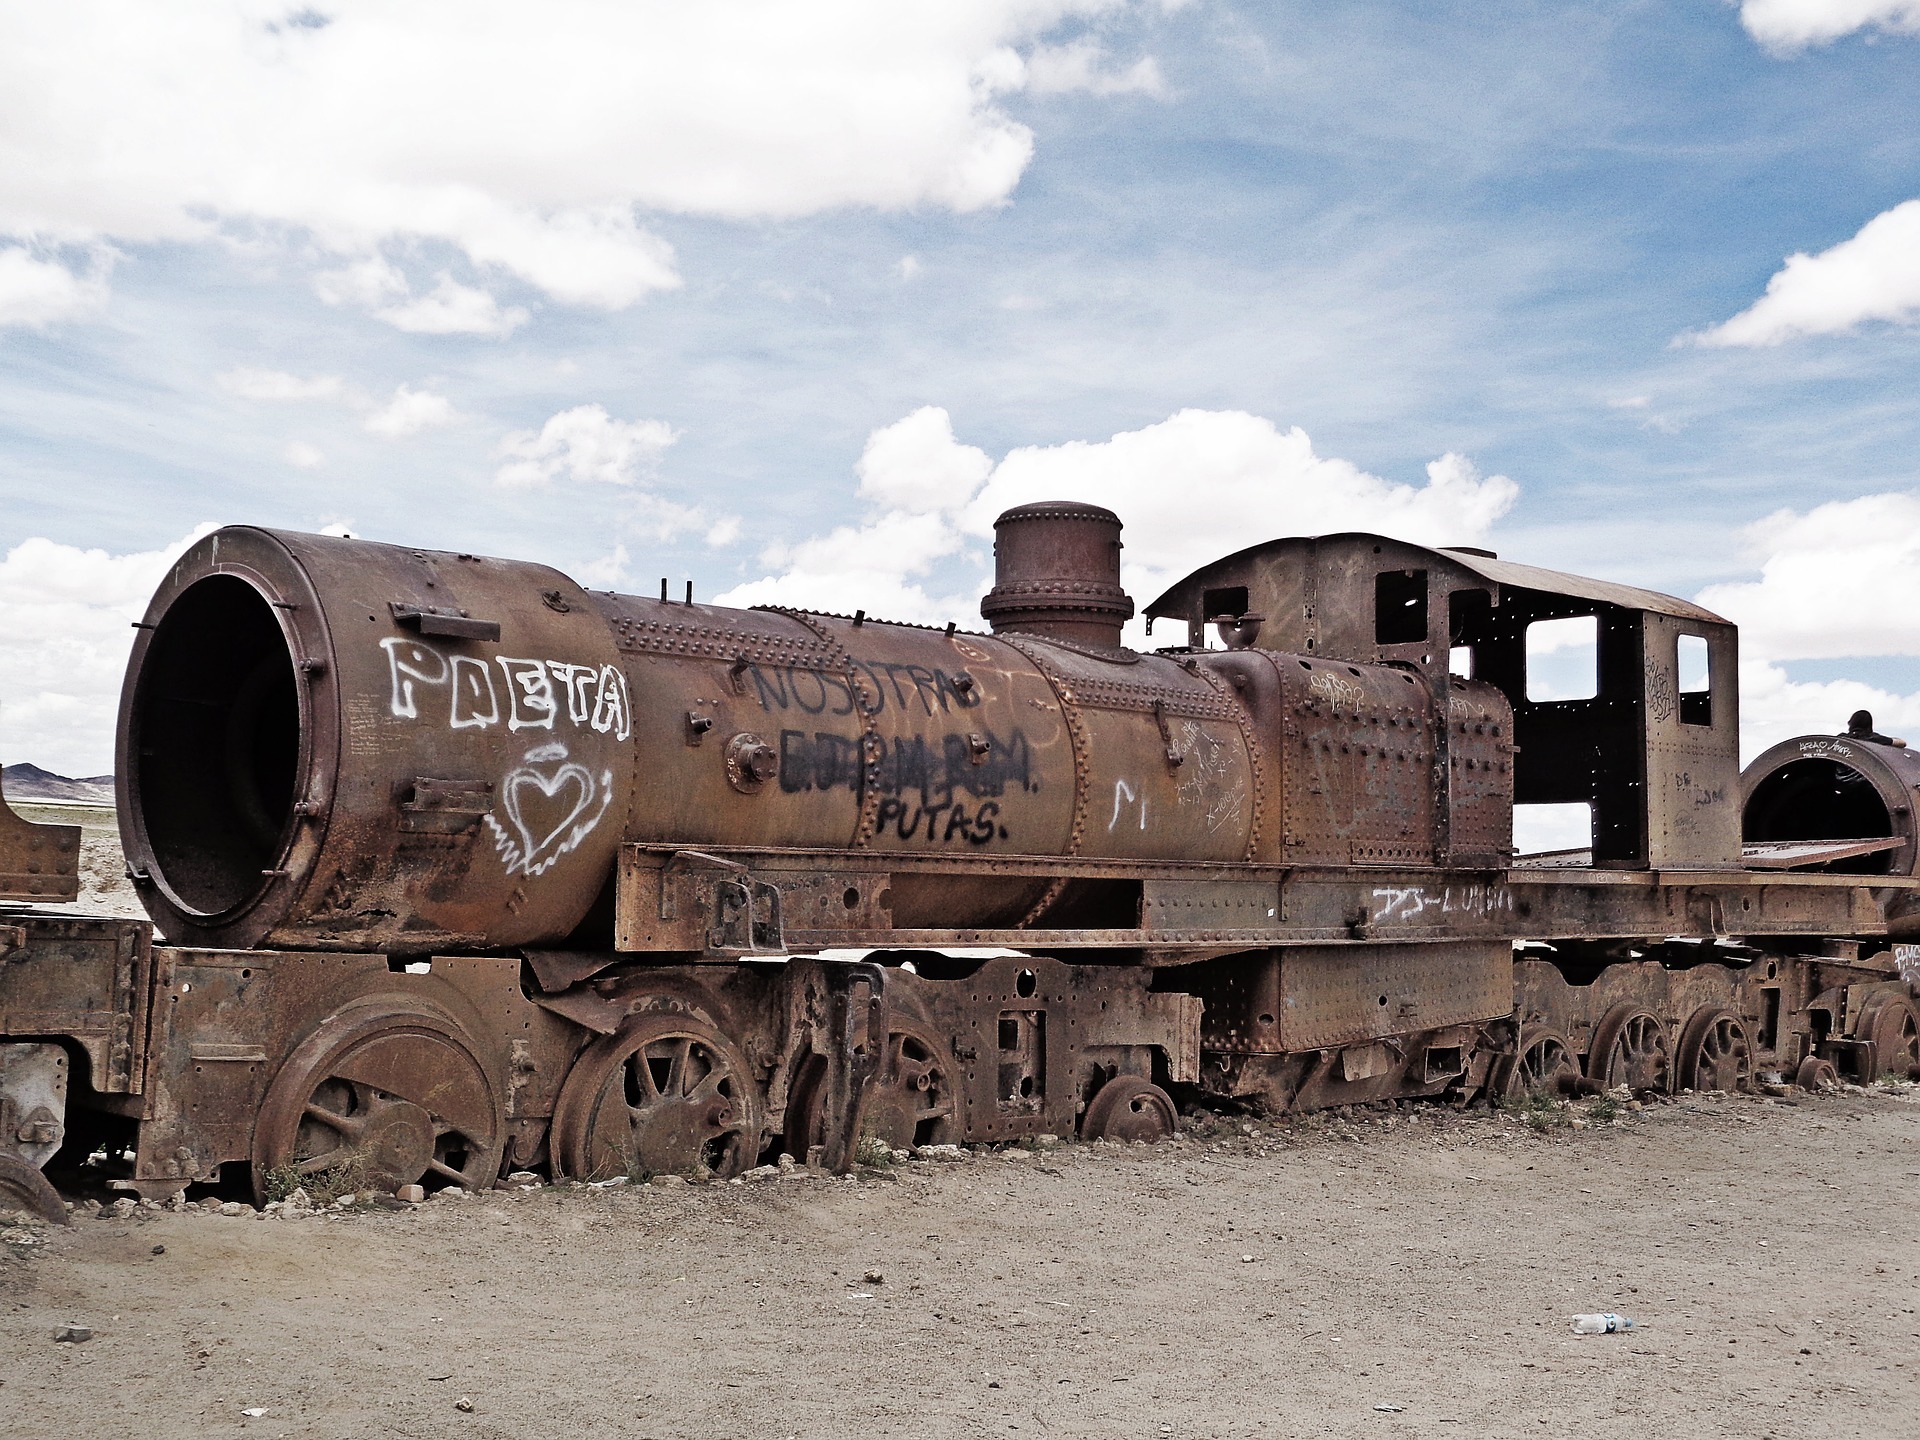 An abandoned train engine in the desert.